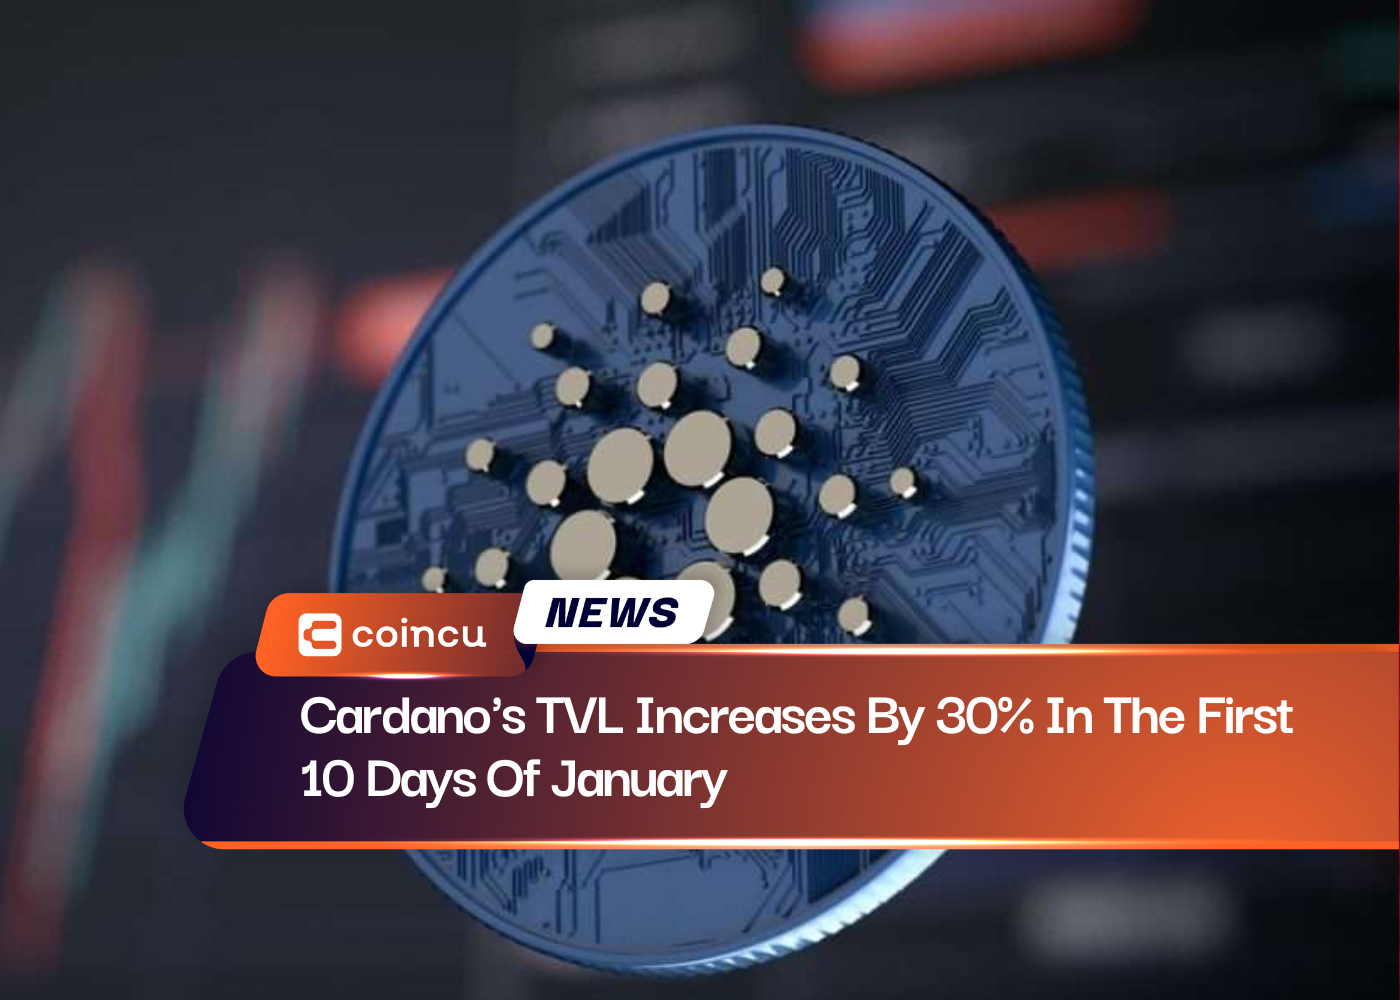 Cardano's TVL Increases By 30% In The First 10 Days Of January